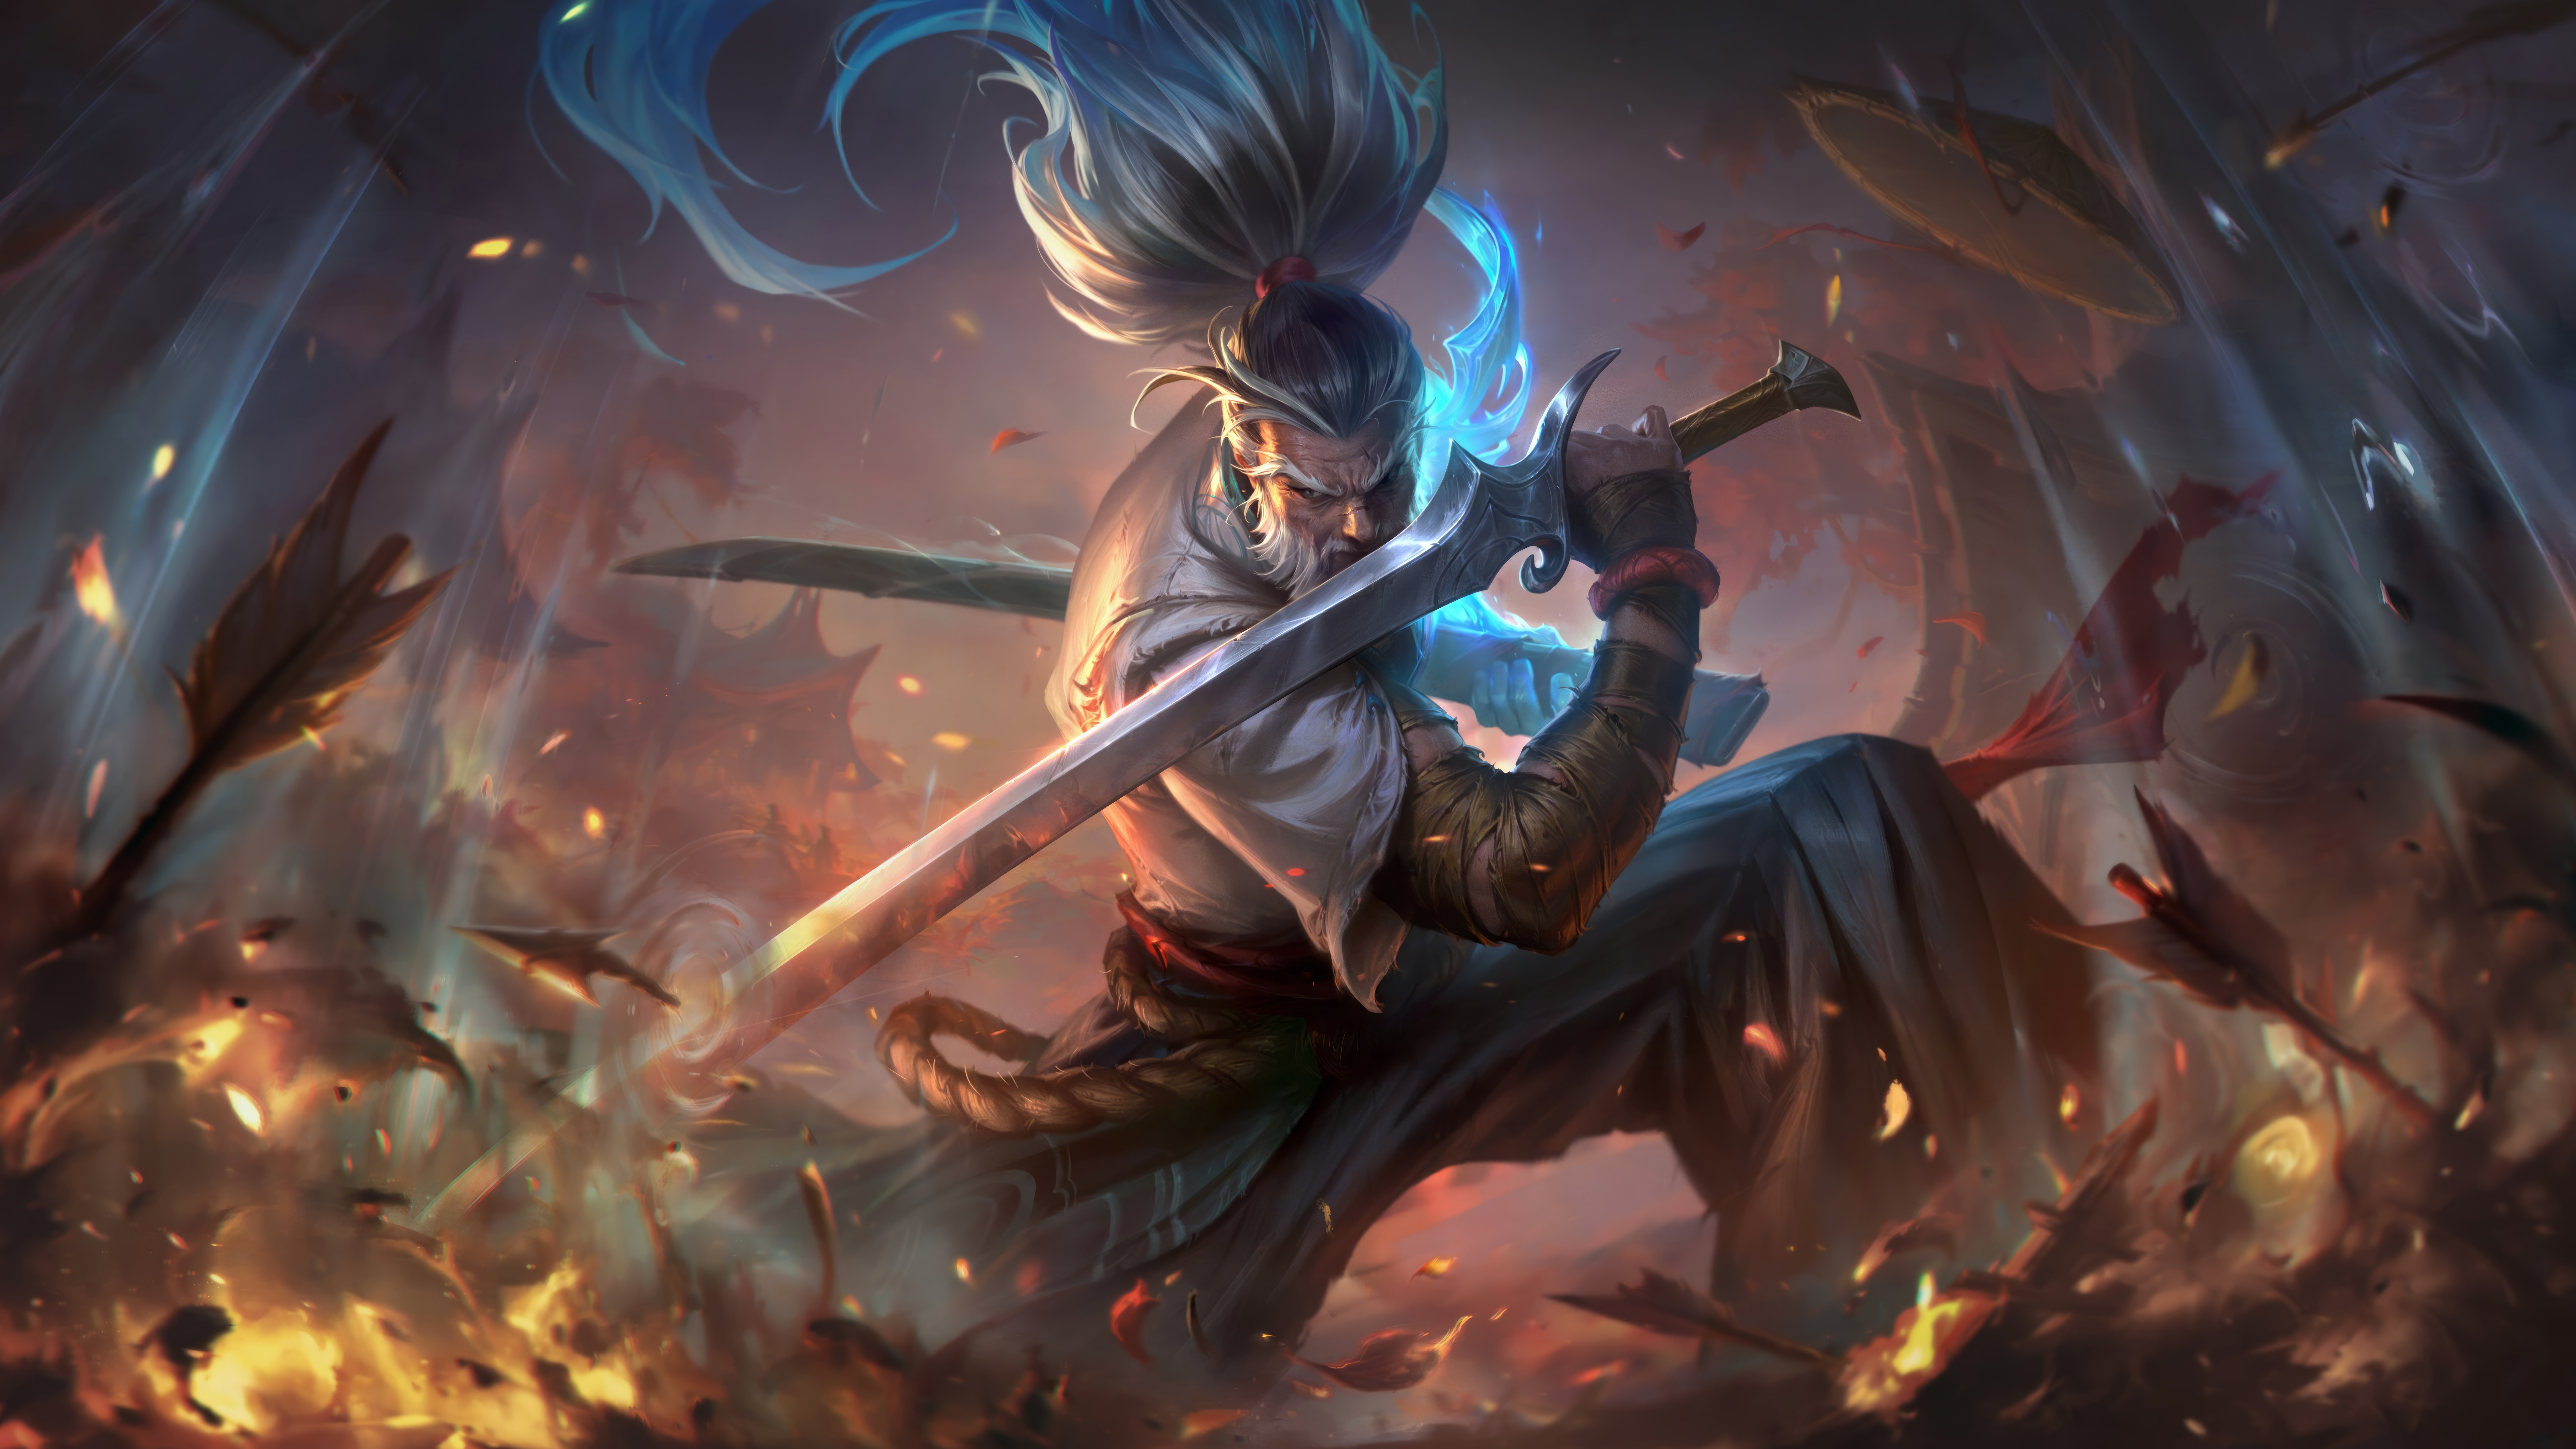 General 7680x4320 Yasuo (League of Legends) digital art Riot Games GZG video games League of Legends 4K video game art weapon video game men sword video game characters arrows long hair white hair